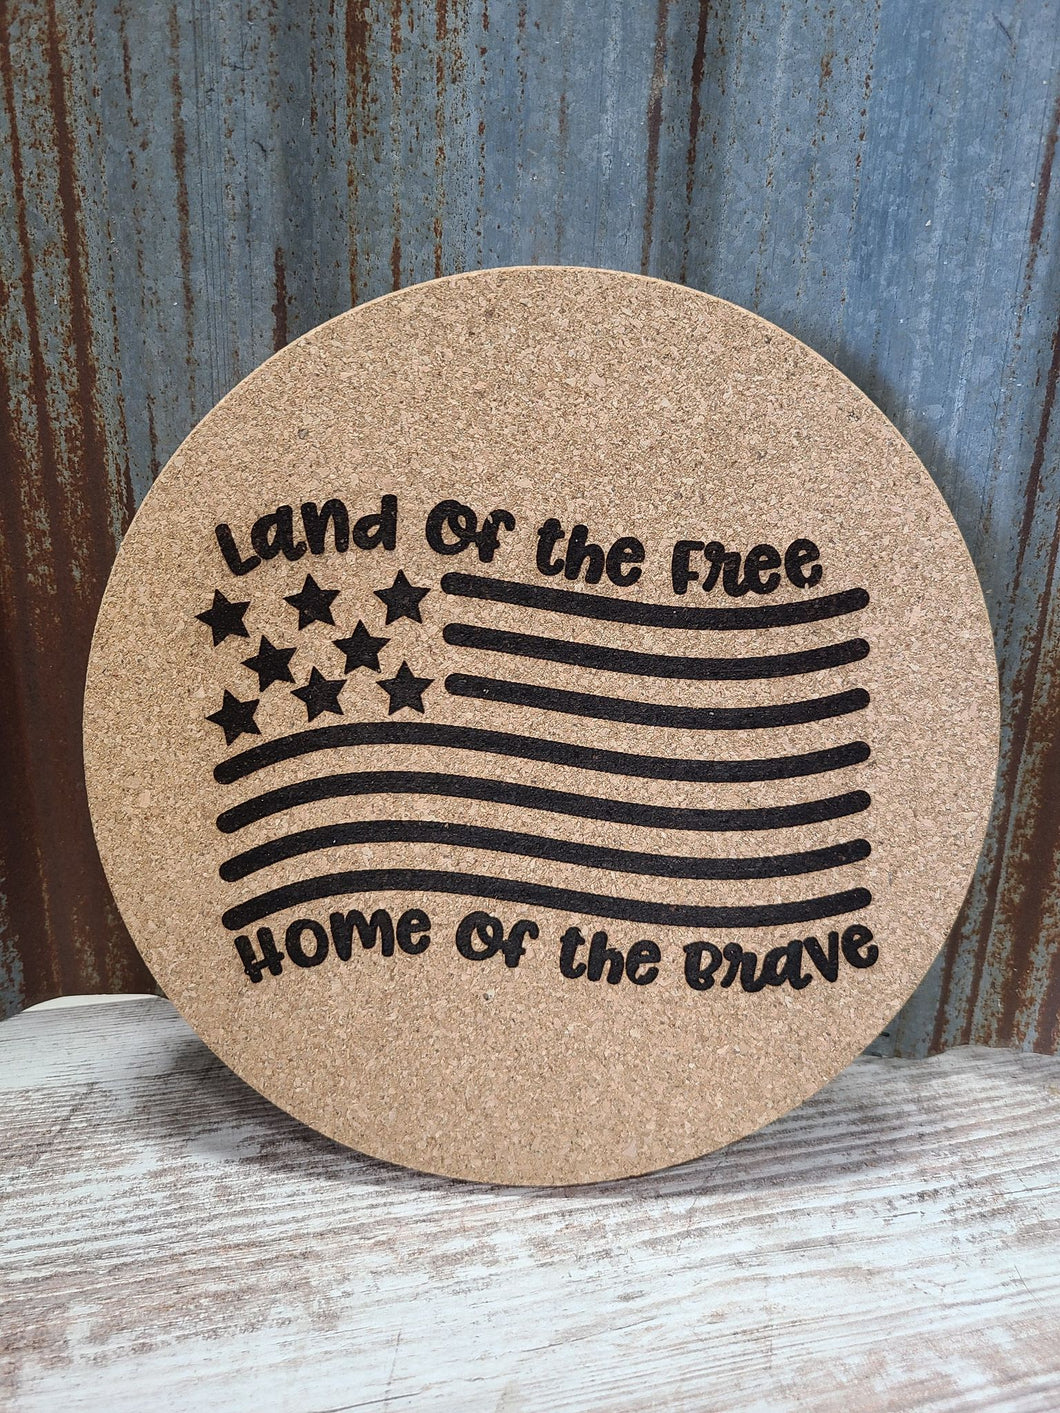 Land of the Free, Home of the Brave Custom Thick Circular Cork Kitchen Trivet